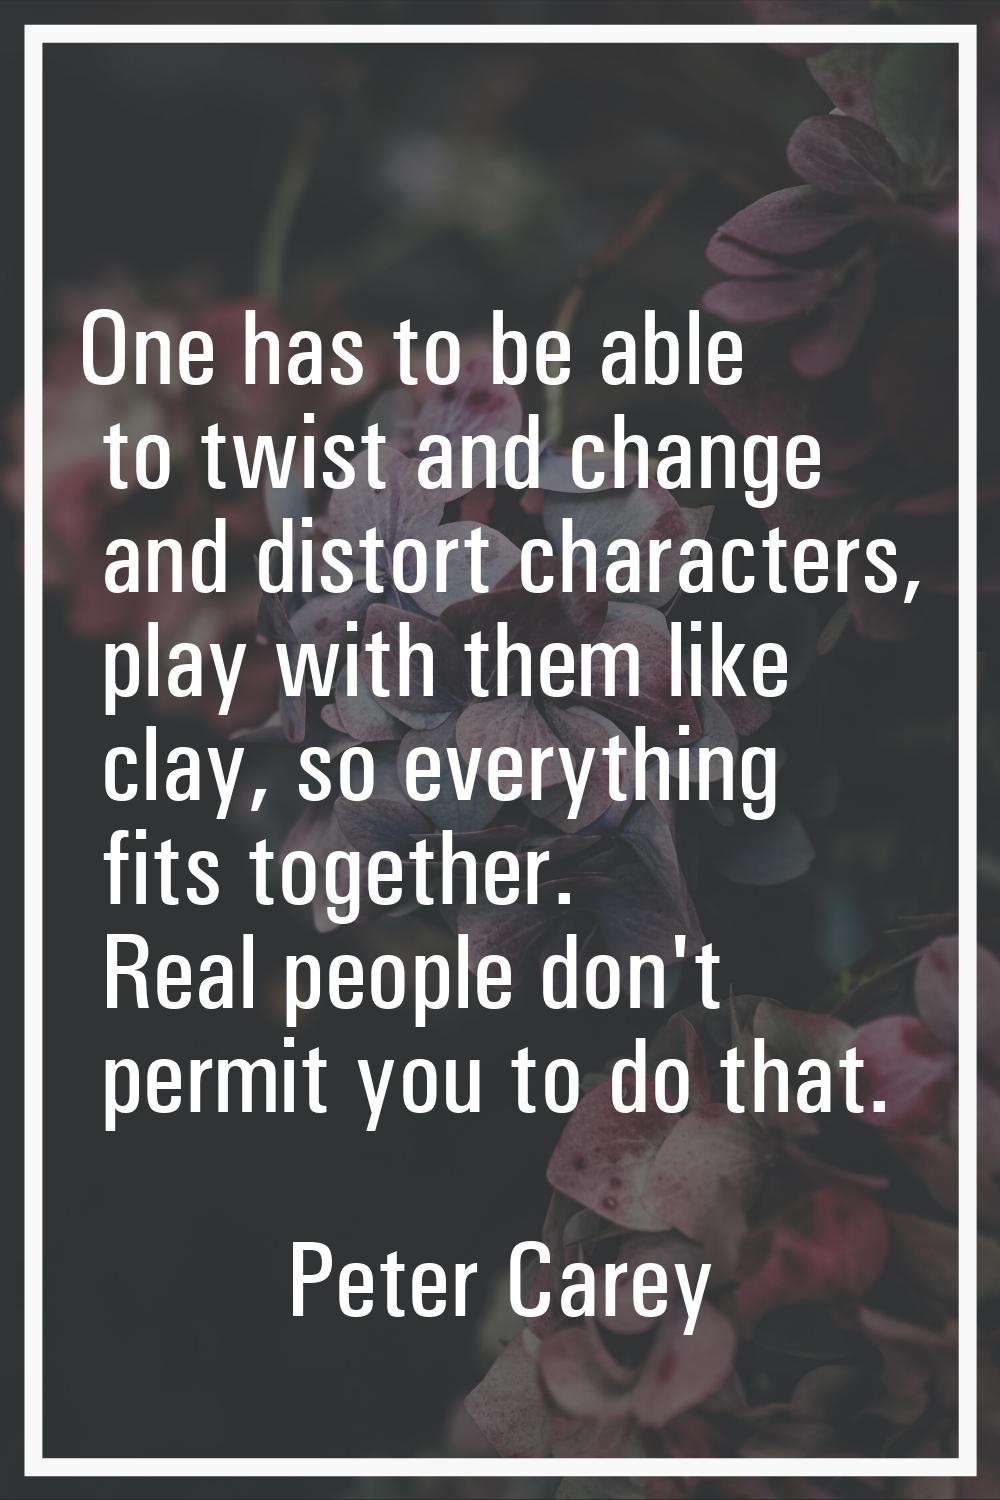 One has to be able to twist and change and distort characters, play with them like clay, so everyth